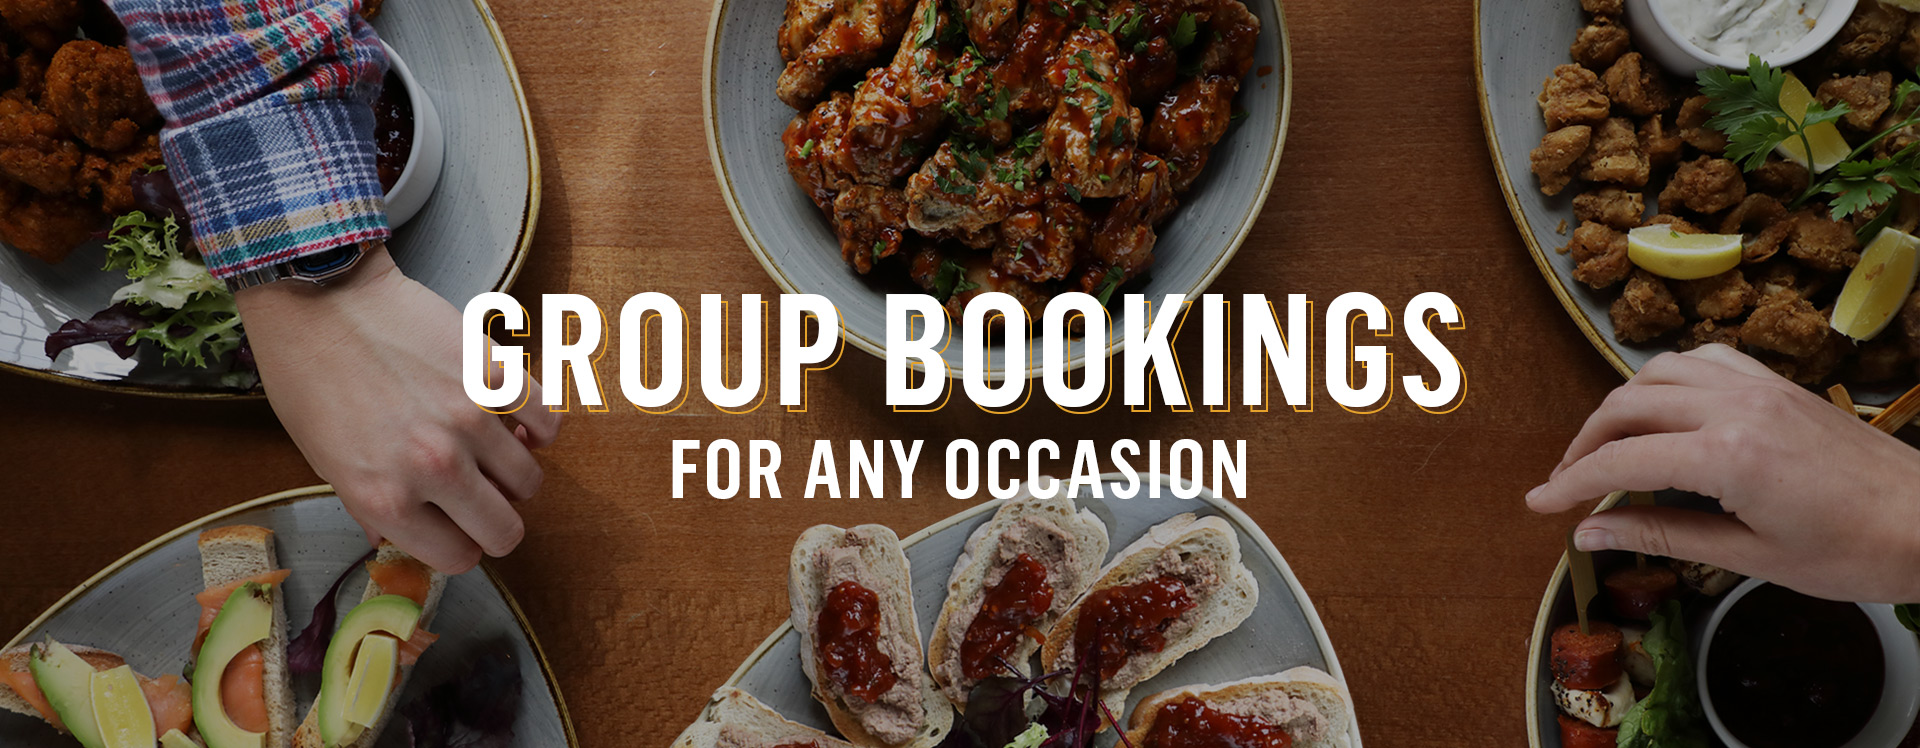 Group Bookings at The Three Greyhounds